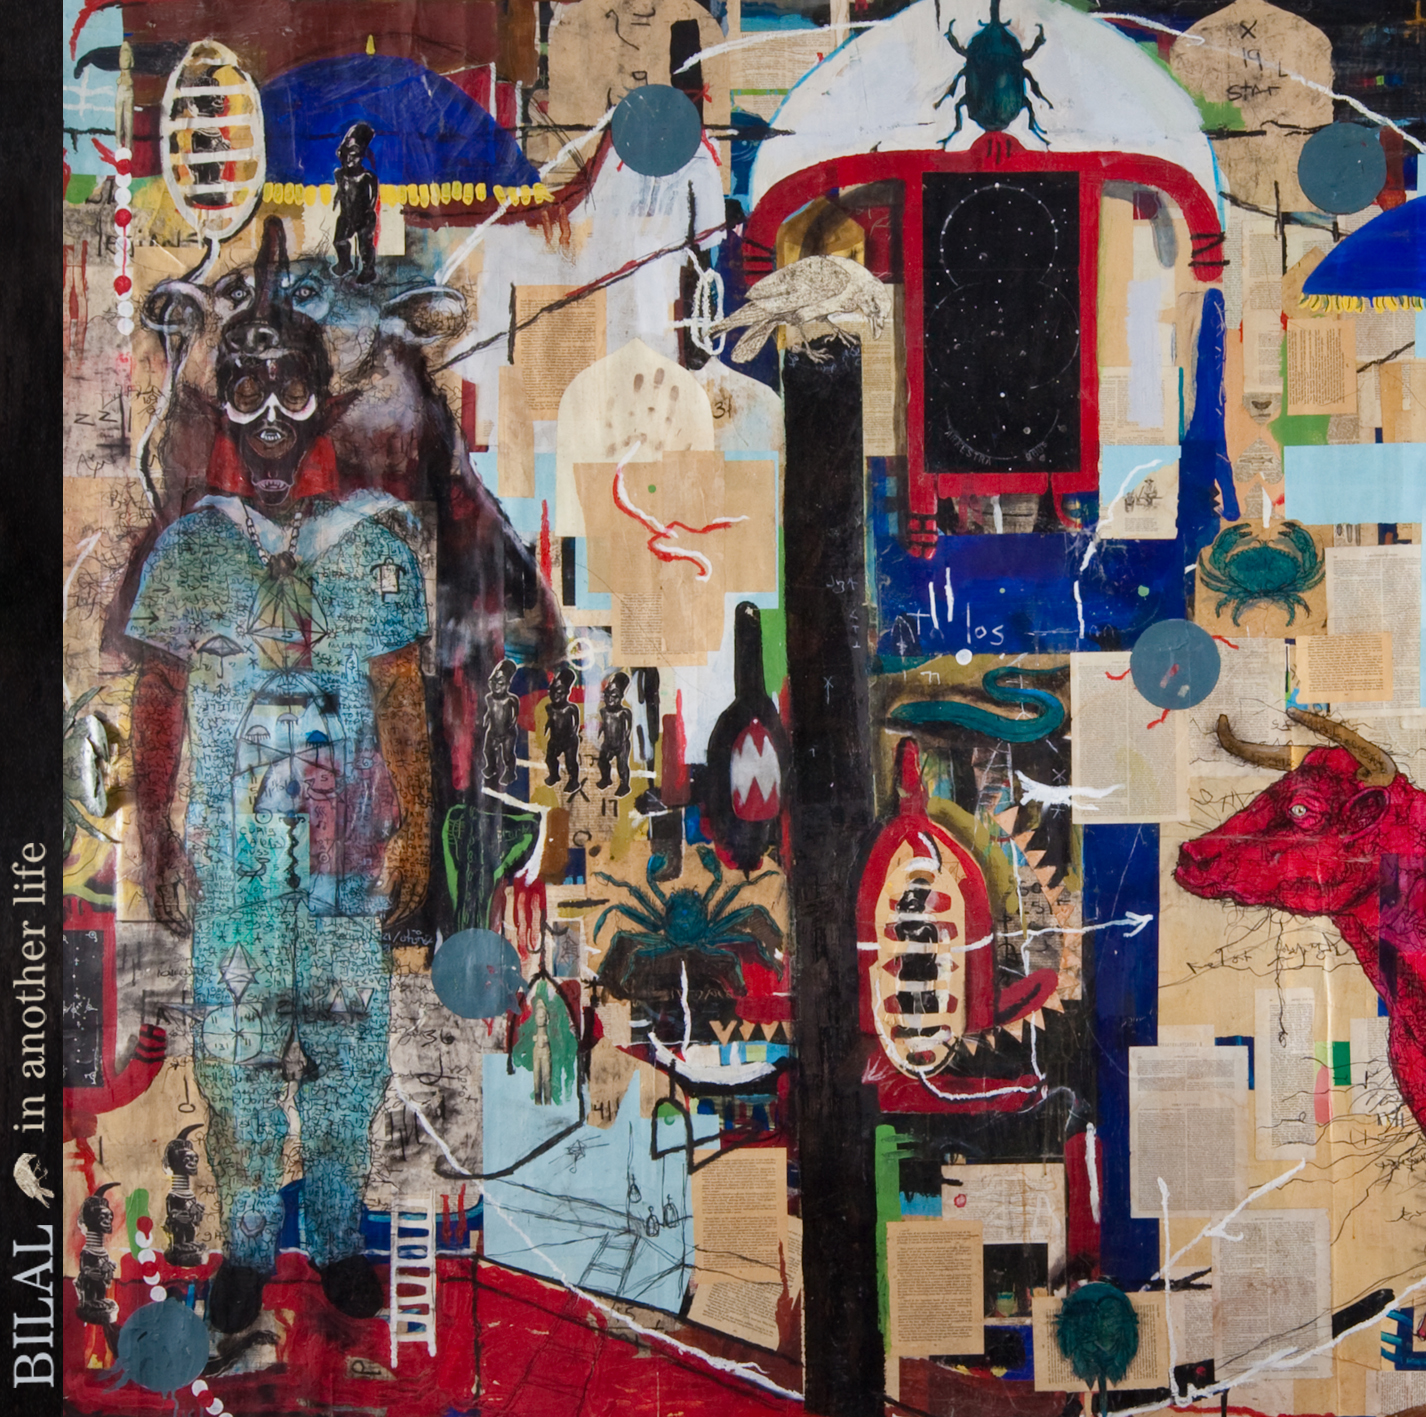 Bilal Releases Cover Art & Tracklist for "In Another Life", Album Features Kendrick Lamar & Big Krit